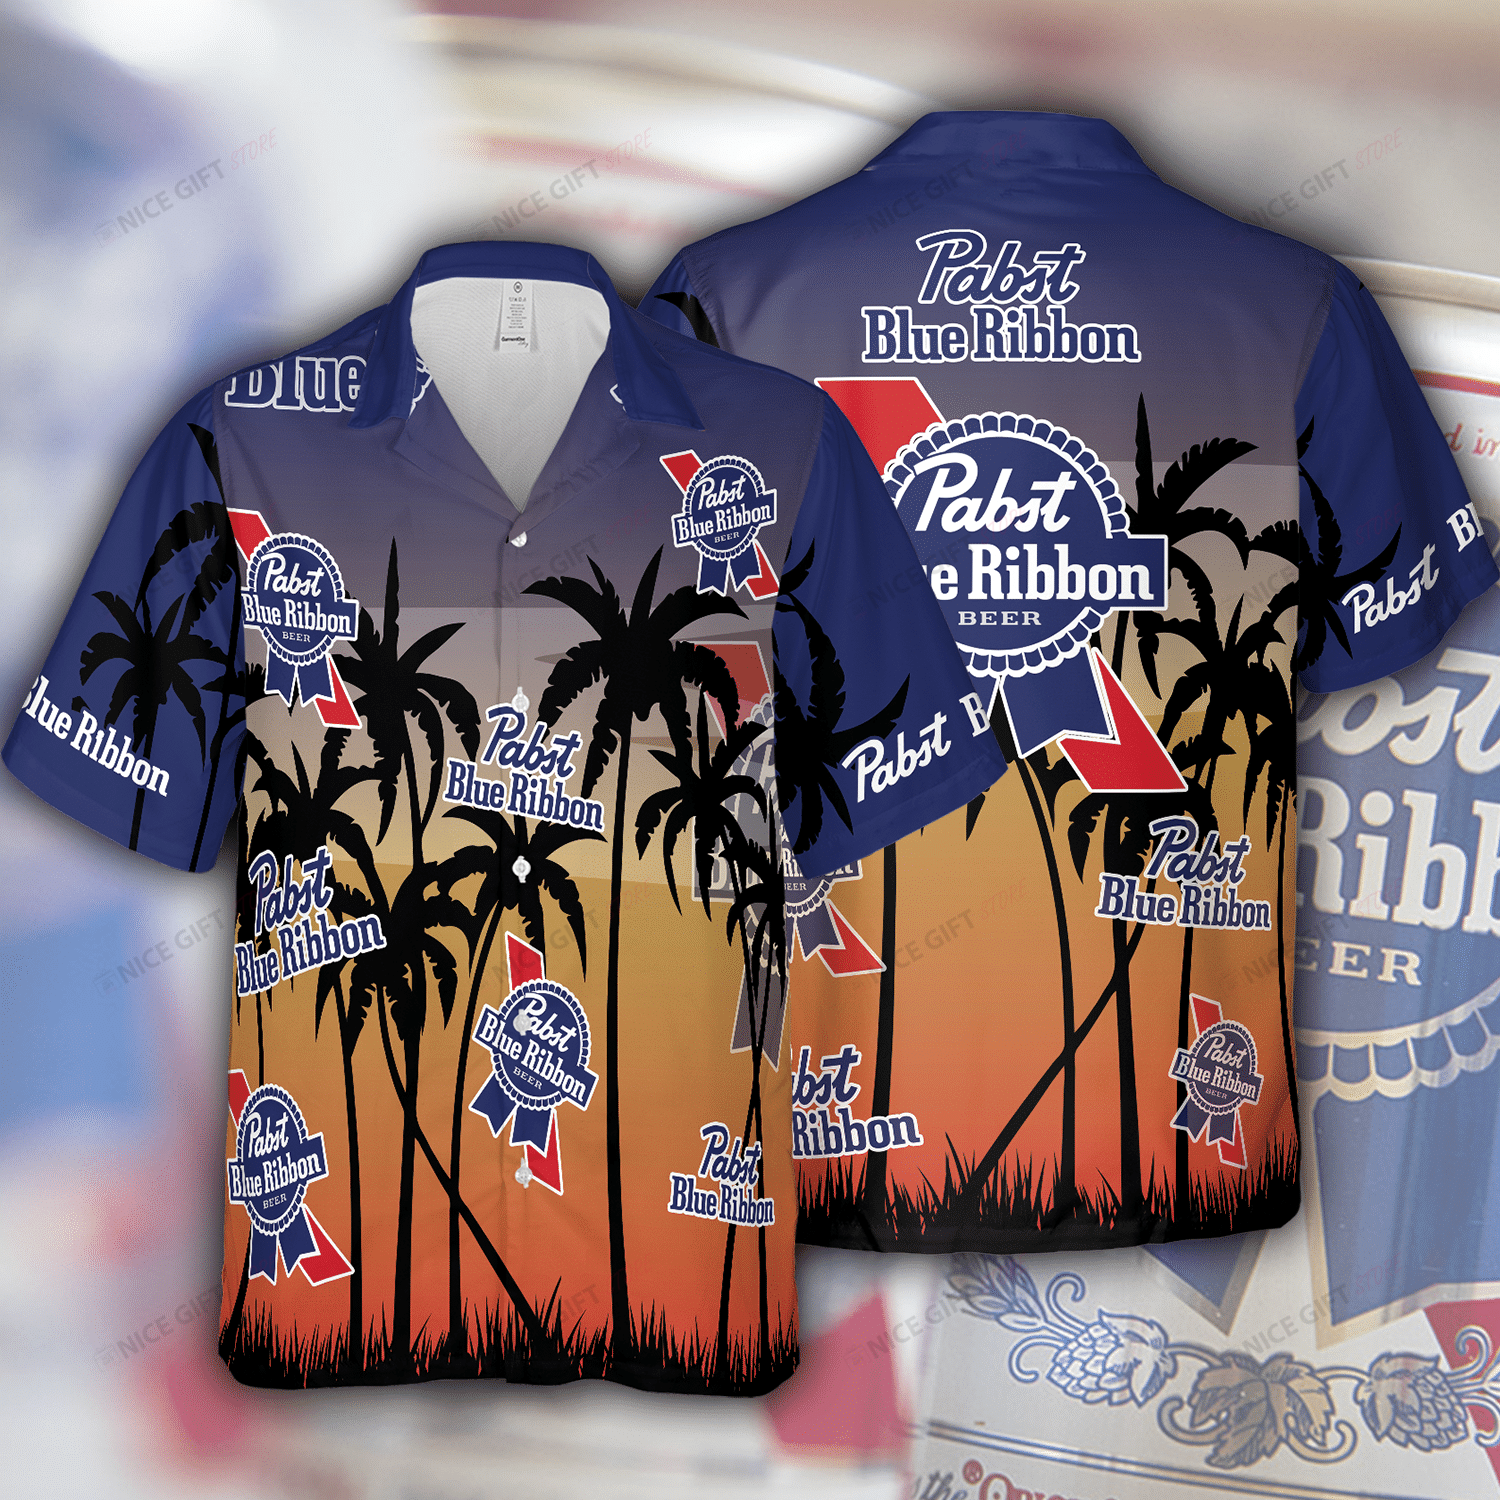 If you're a fan of a Hawaiian Shirt, you can choose one at our store 79